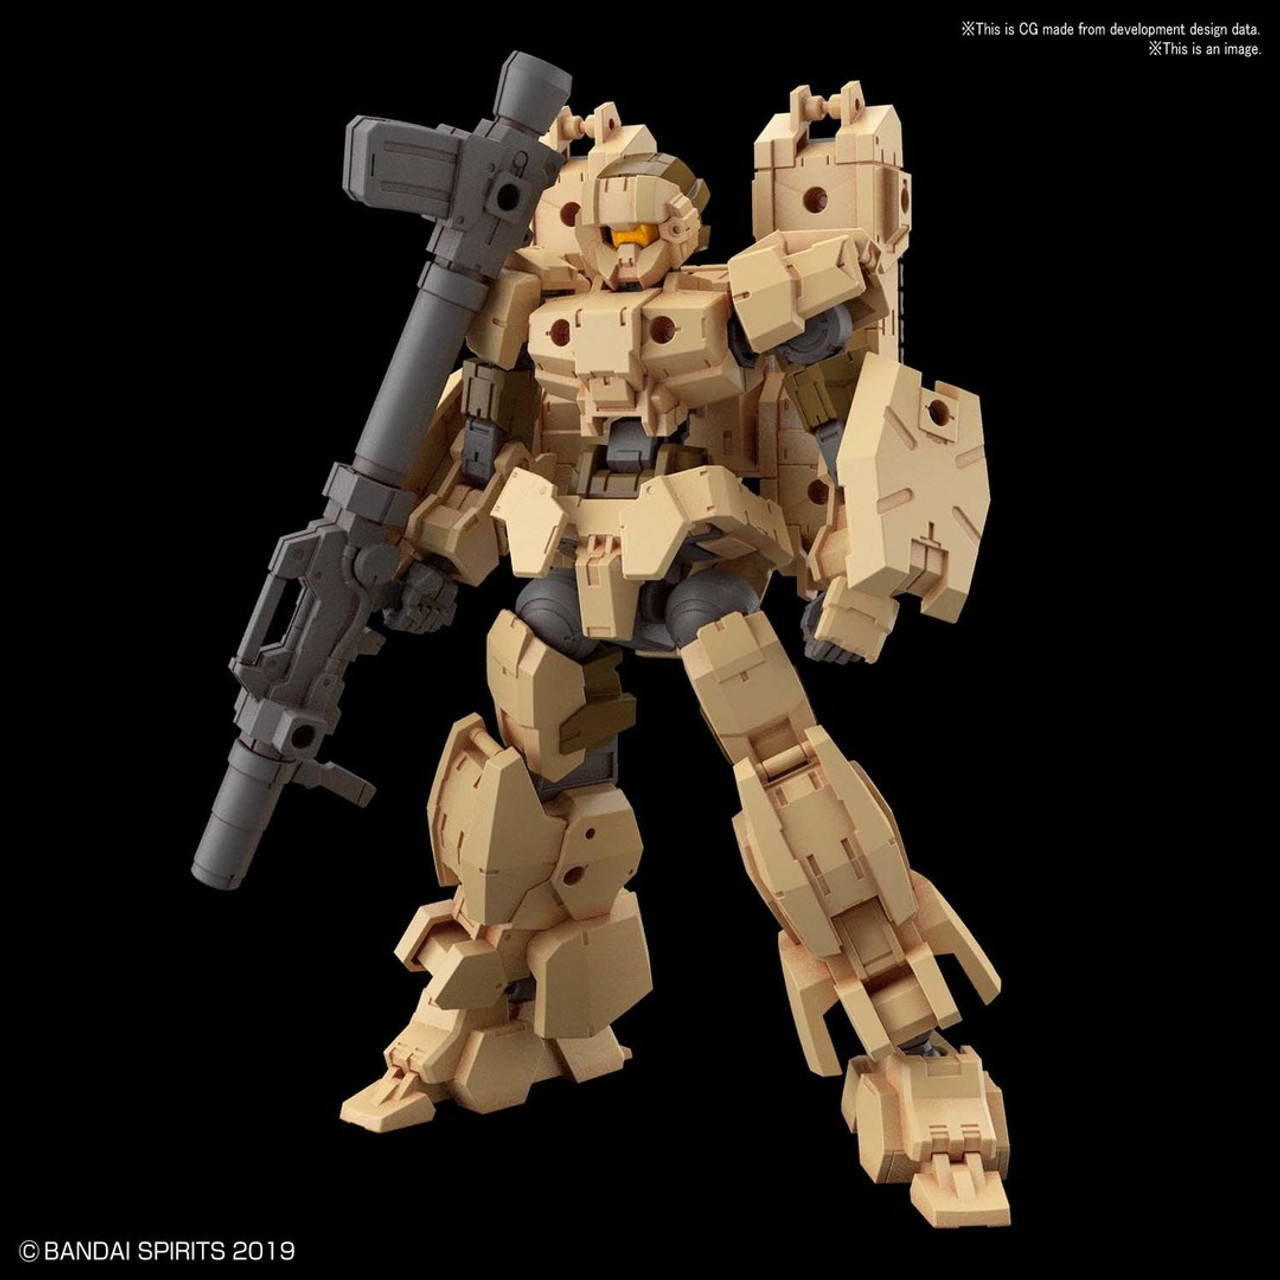 BAN2500629   #19 Eexm-17 Alto Ground Type (Brown) "30 Minute Missions", Bandai Spirits 30MM